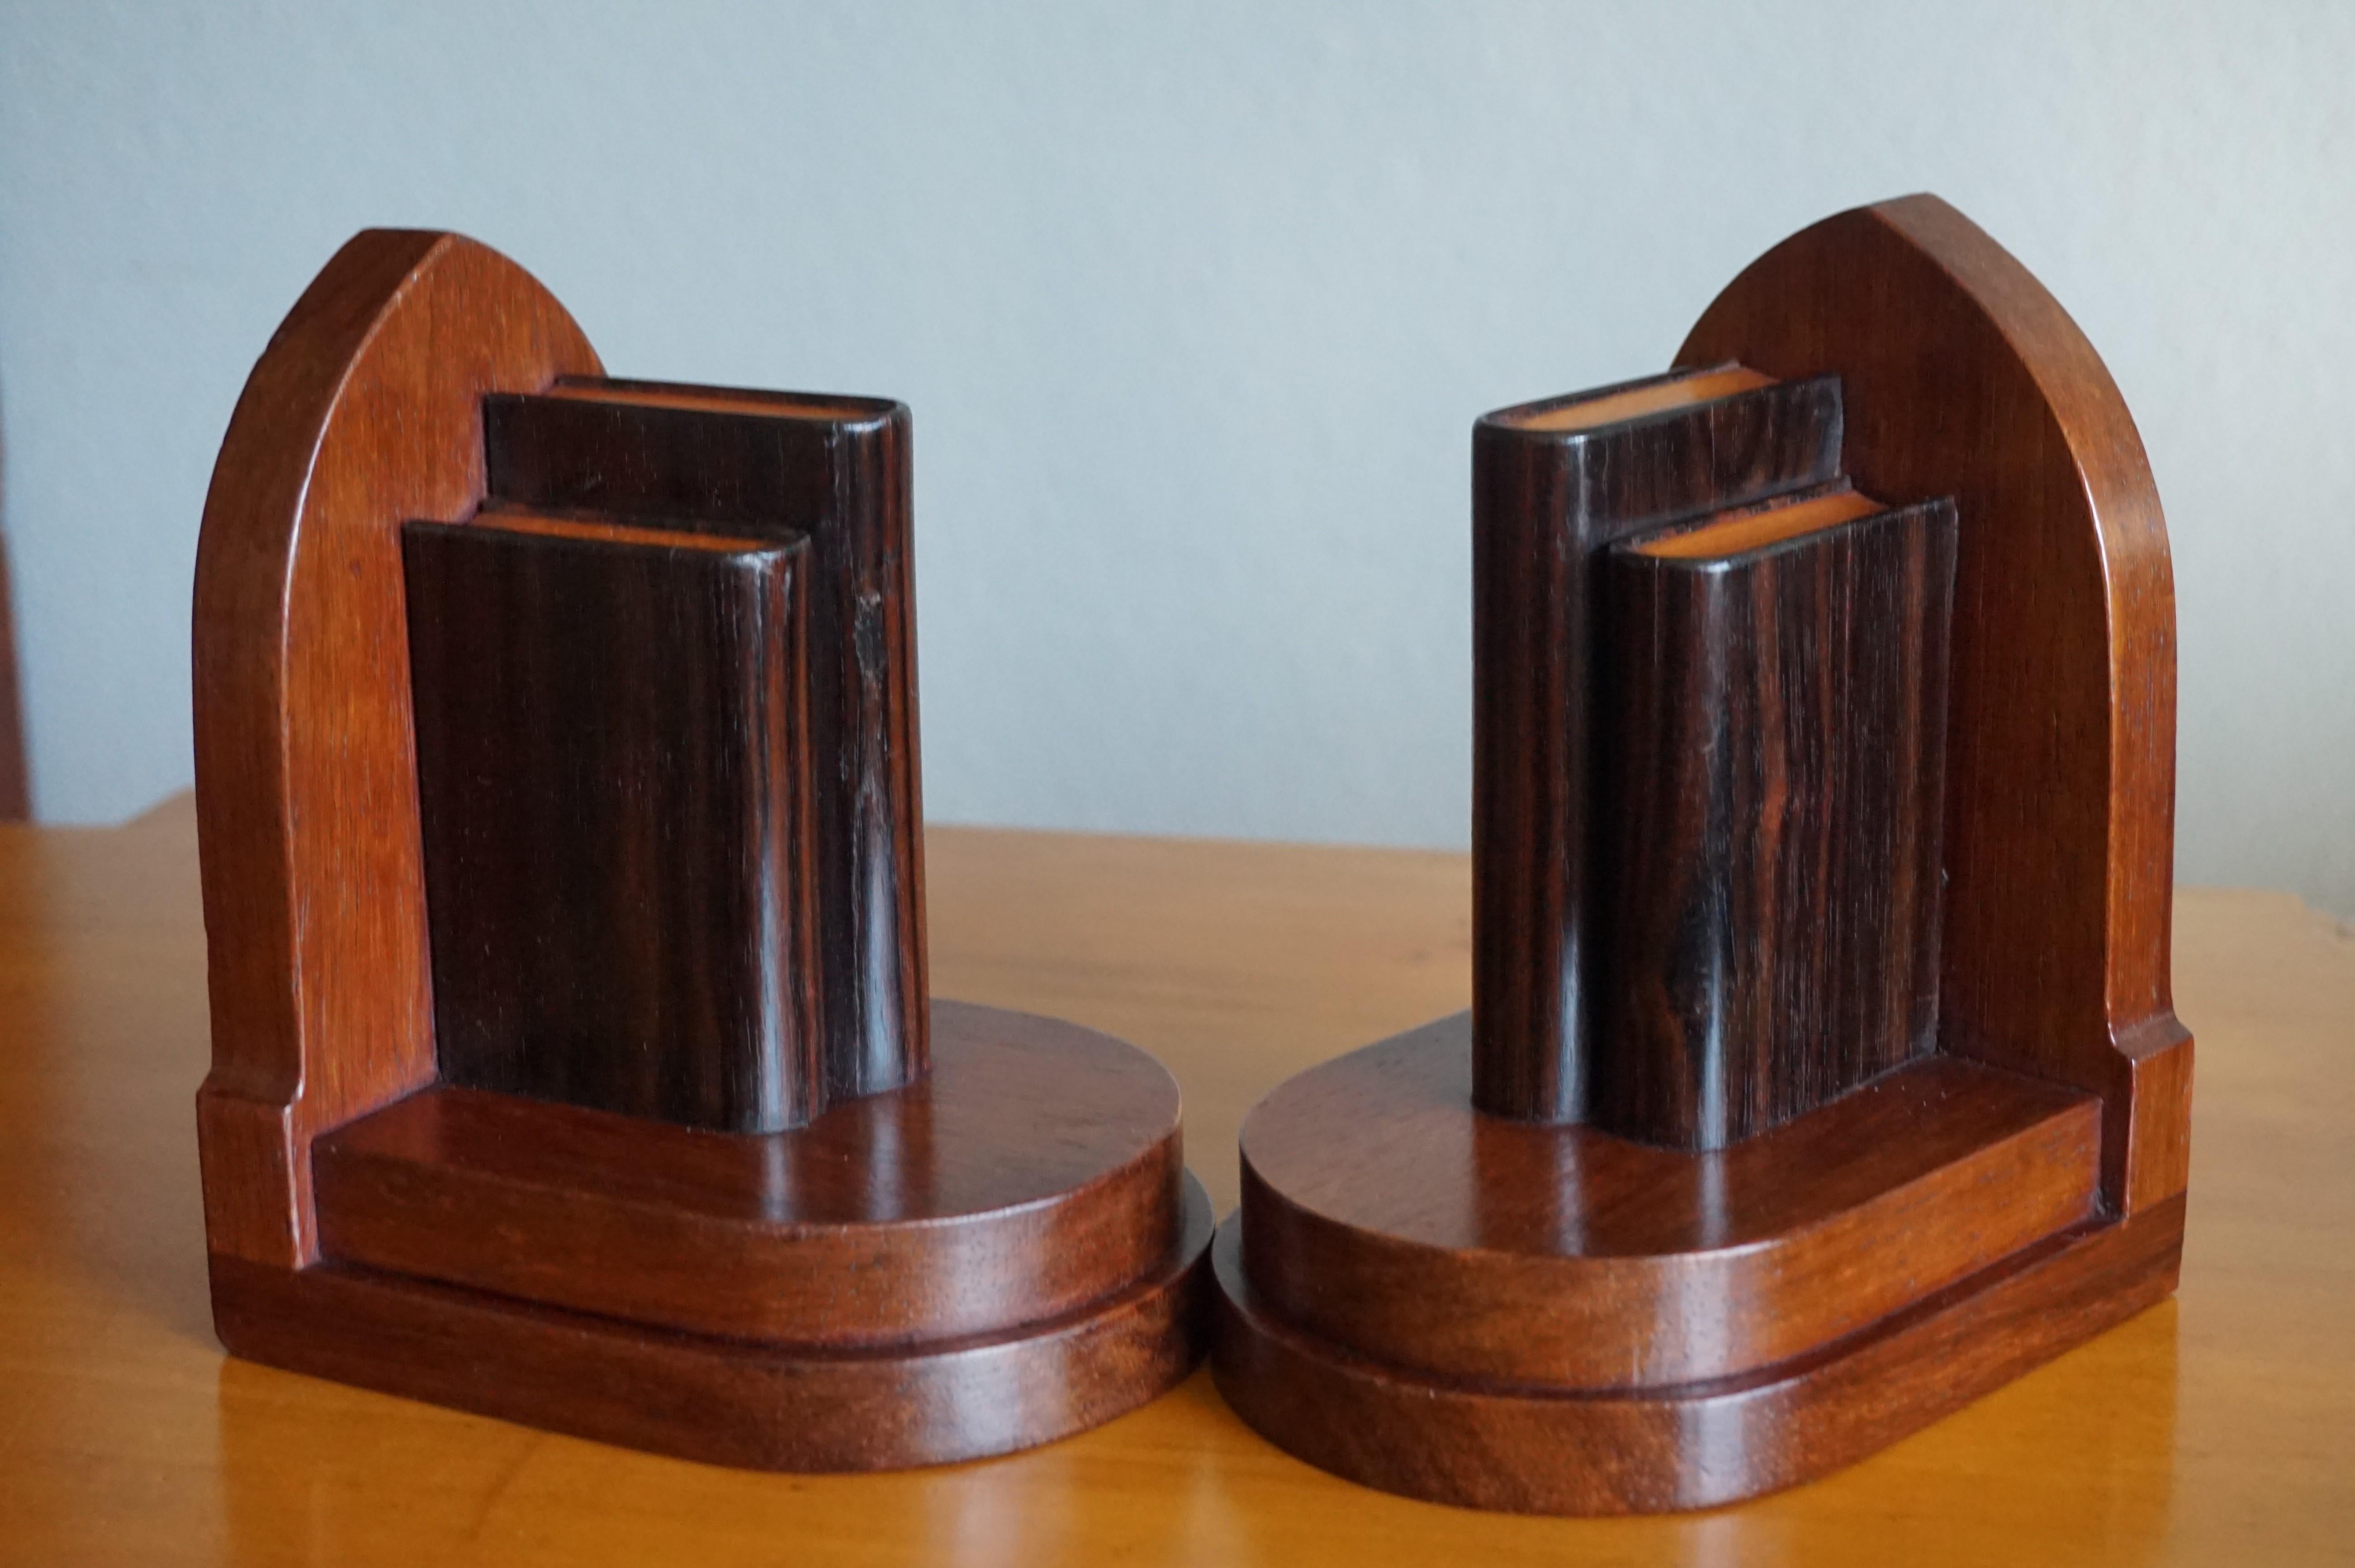 Hand-Carved Early 20th Century Walnut and Coromandel Art Deco Bookends of Miniature Books